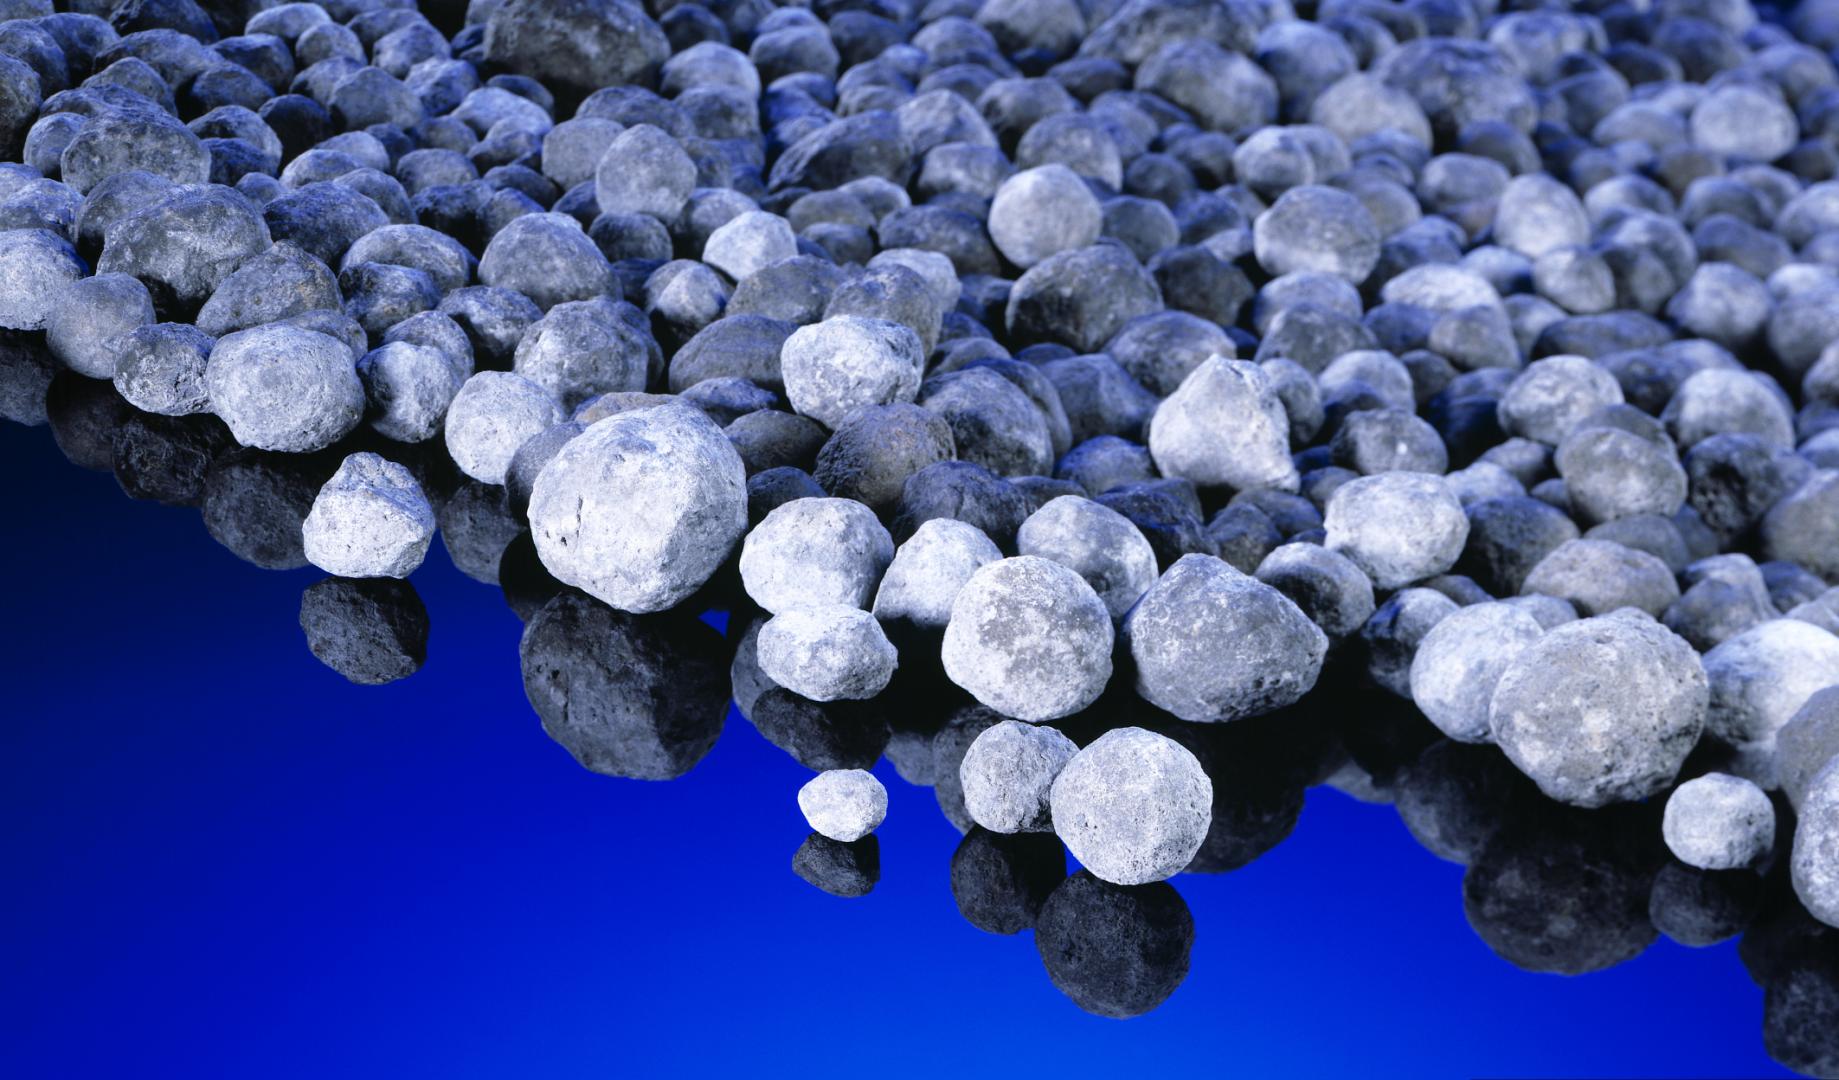 Production of clinker, an intermediate product, results in high carbon emissions.